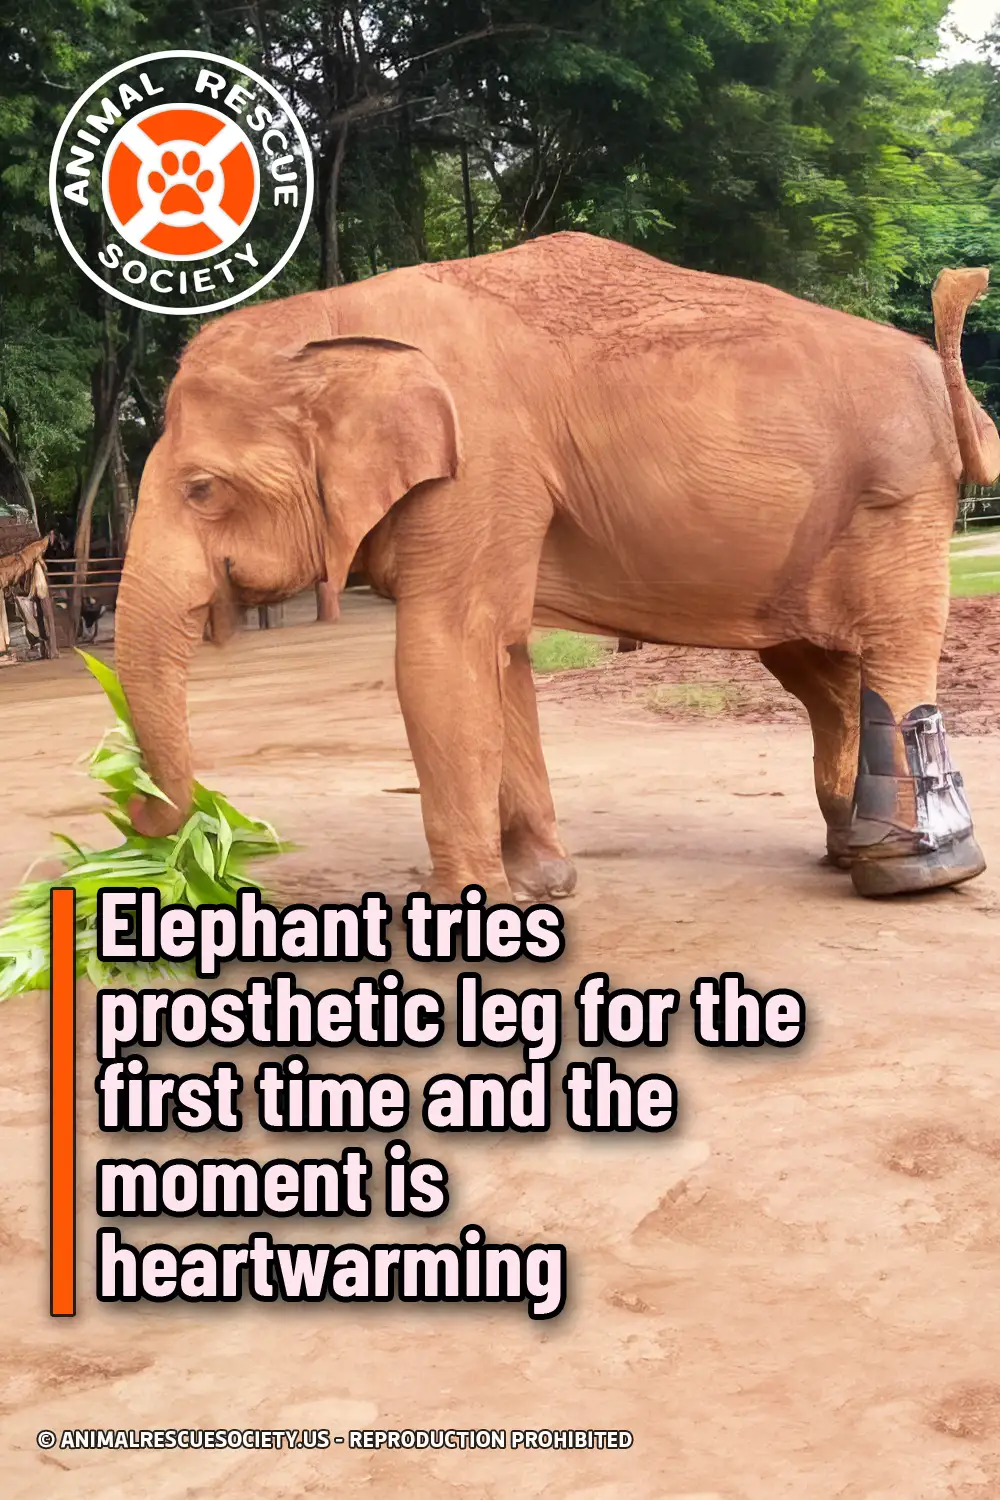 Elephant tries prosthetic leg for the first time and the moment is heartwarming